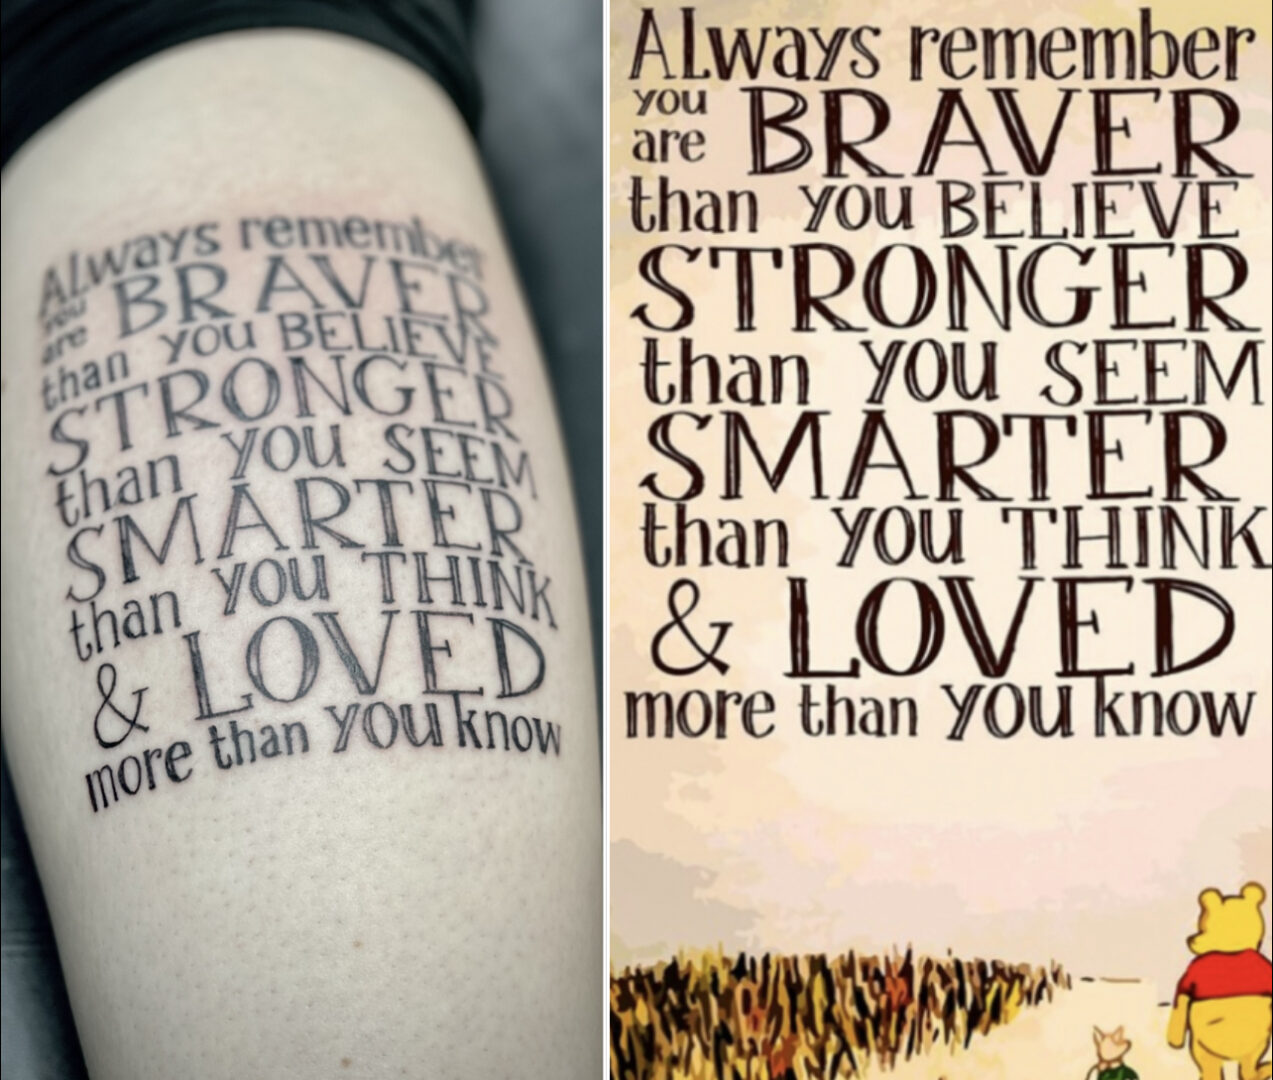 A tattoo that says always remember you are braver than you believe.